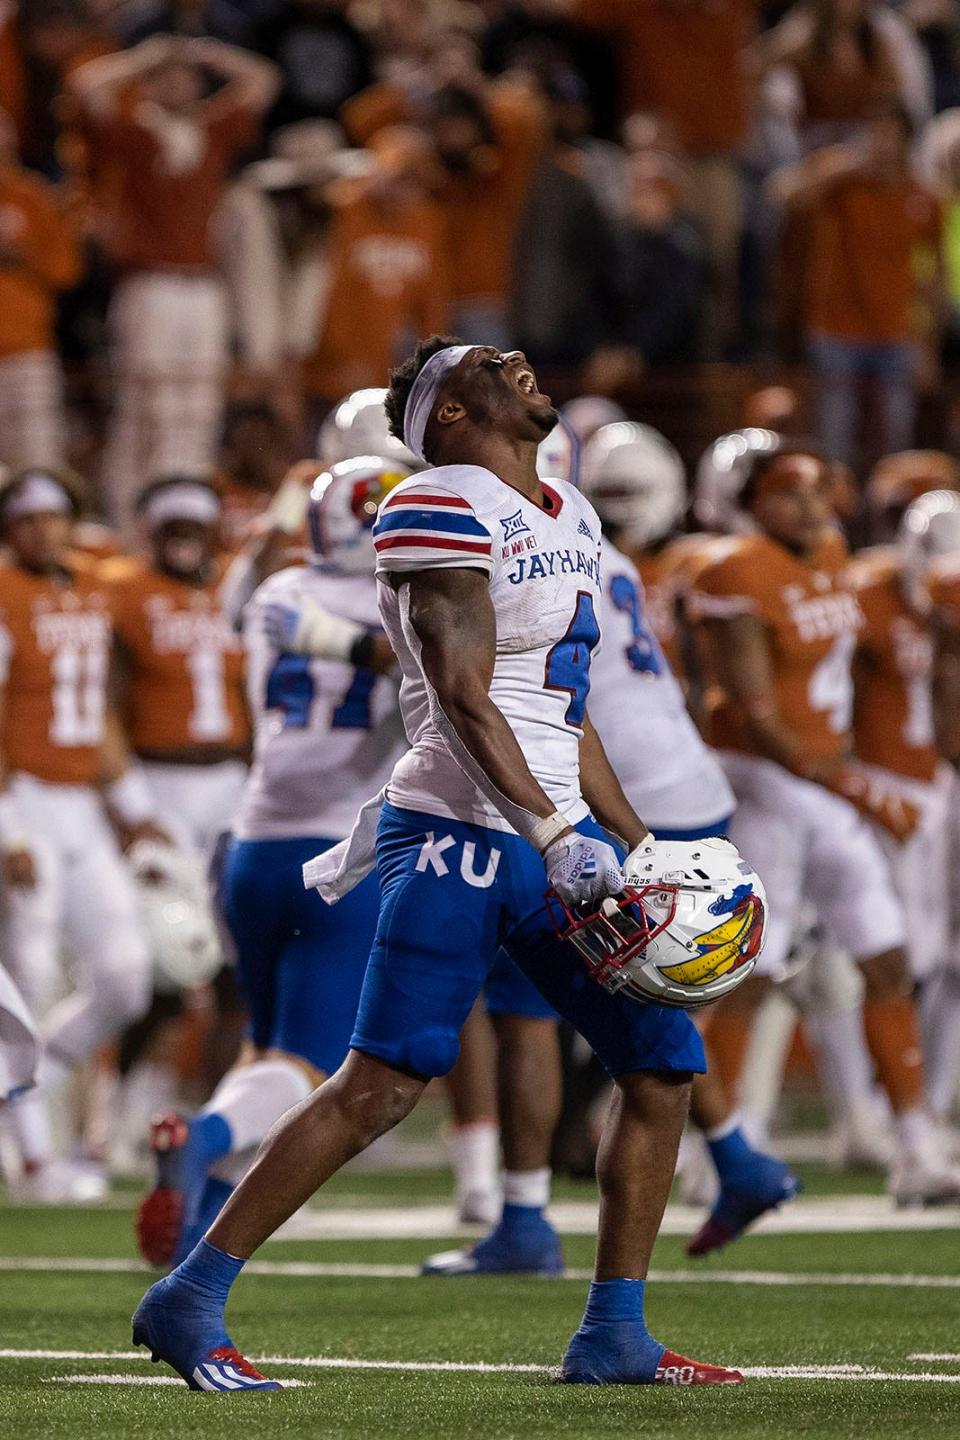 Kansas football running back Devin Neal (4) reacts after the Jayhawks won a game against the Texas Longhorns in overtime on Nov. 13, 2021. Neal was a freshman that season at Kansas.